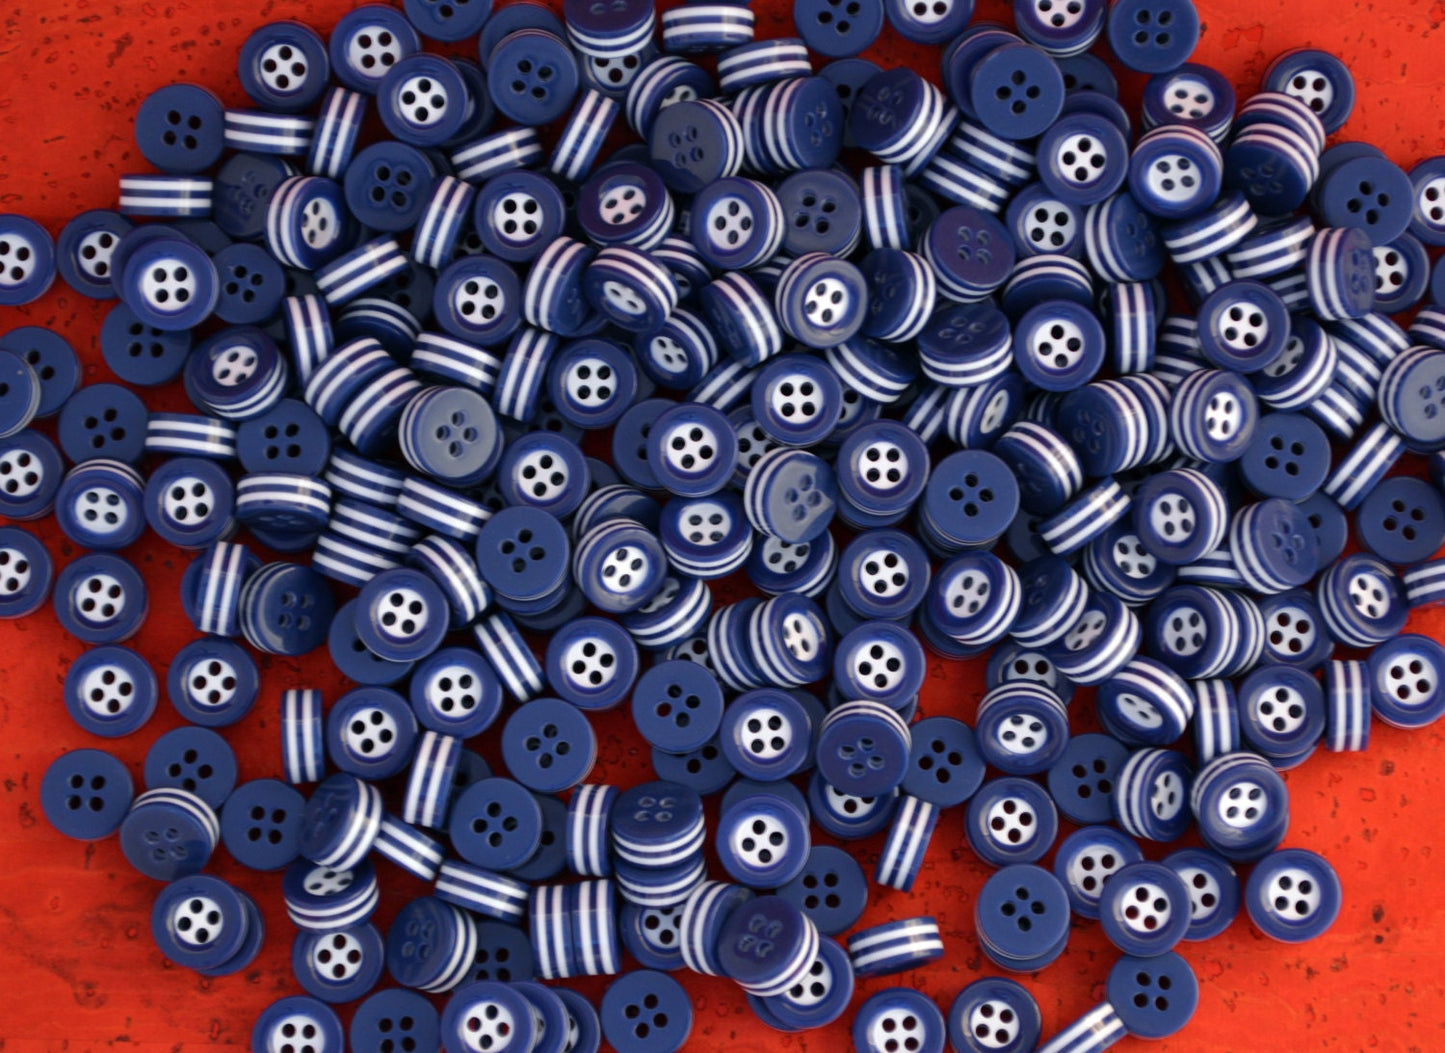 16 white and blue STRIPED BUTTONS for 1 complete button down shirt - 5mm thick! - great quality - Made in ITALY